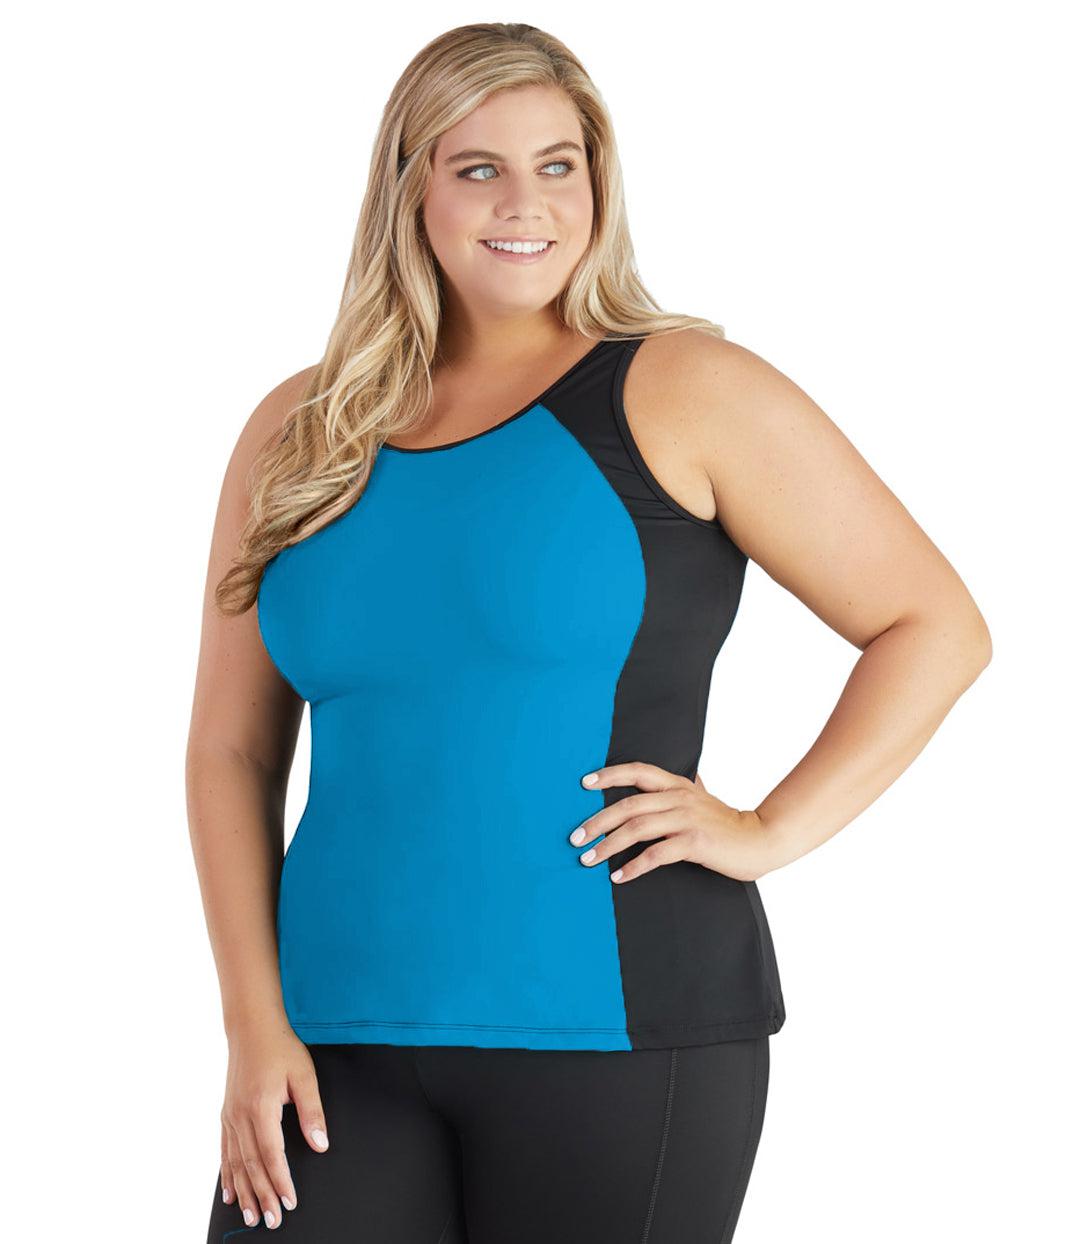 Plus size model, front view, wearing QuikEnergy Tankini Swim Top Turq and Black. Scoop neck with solid turquoise torso and black colorblock waist and shoulders.